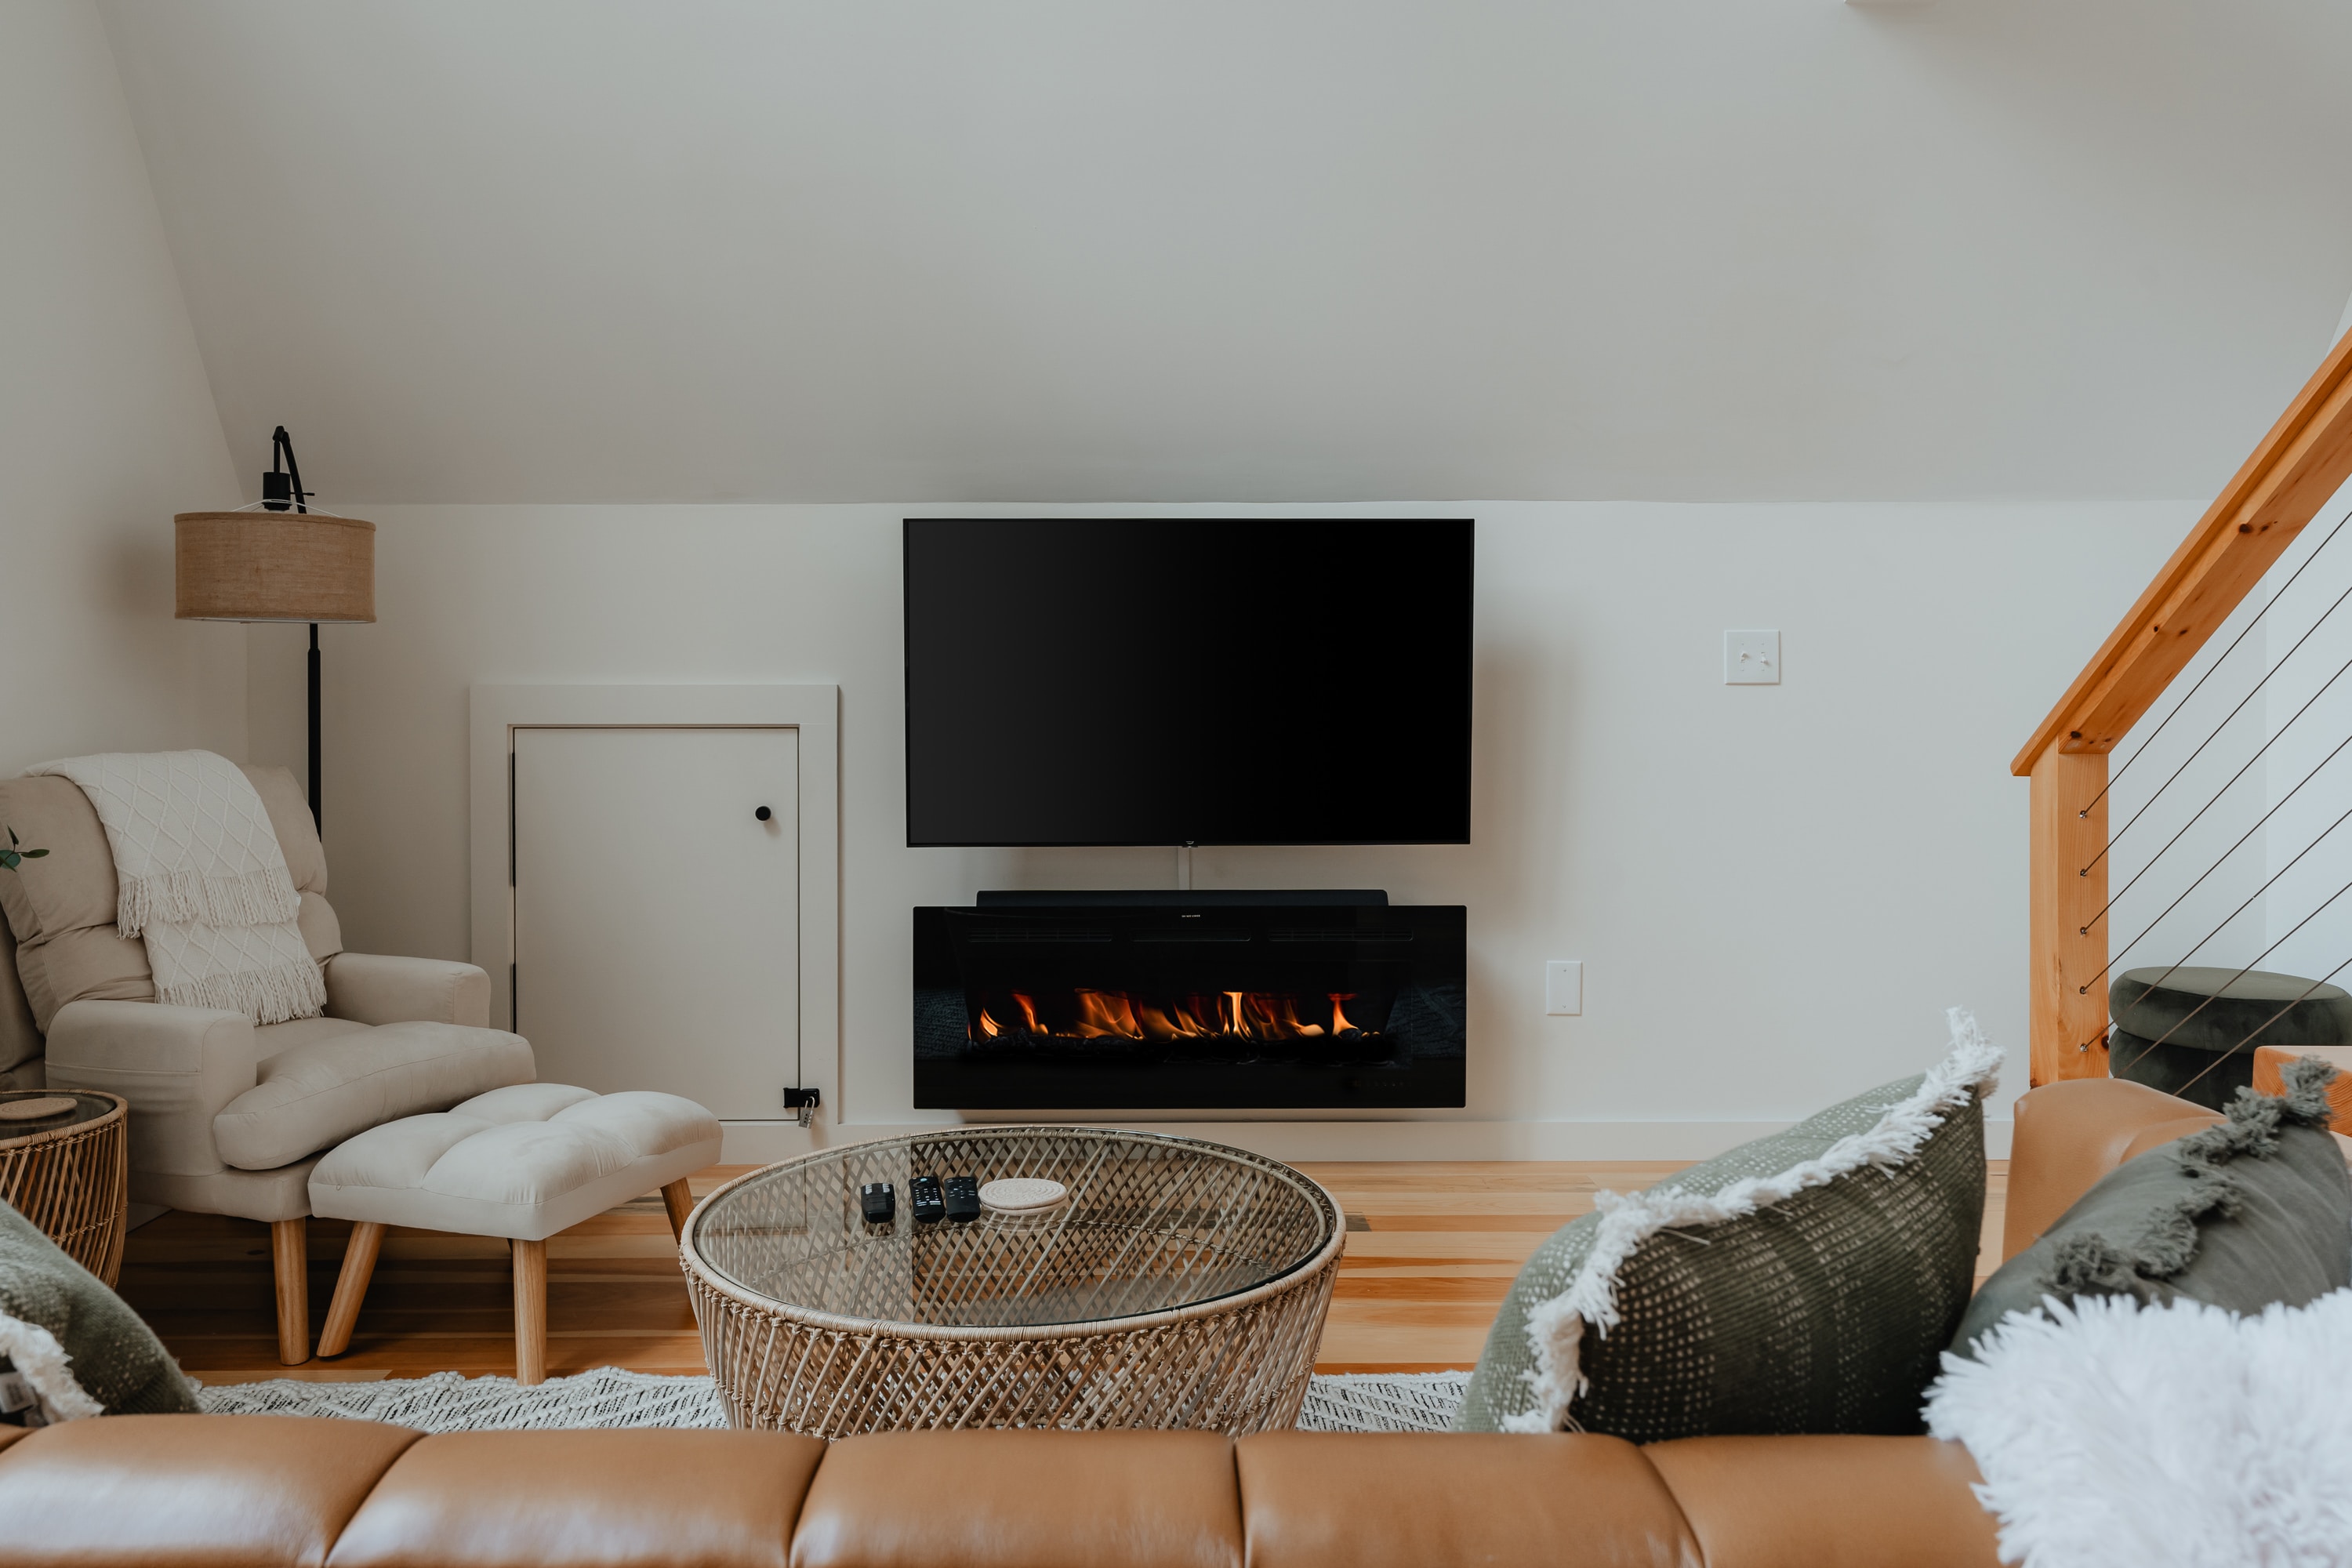 Media Wall with Fireplace Ideas: Factors to Consider